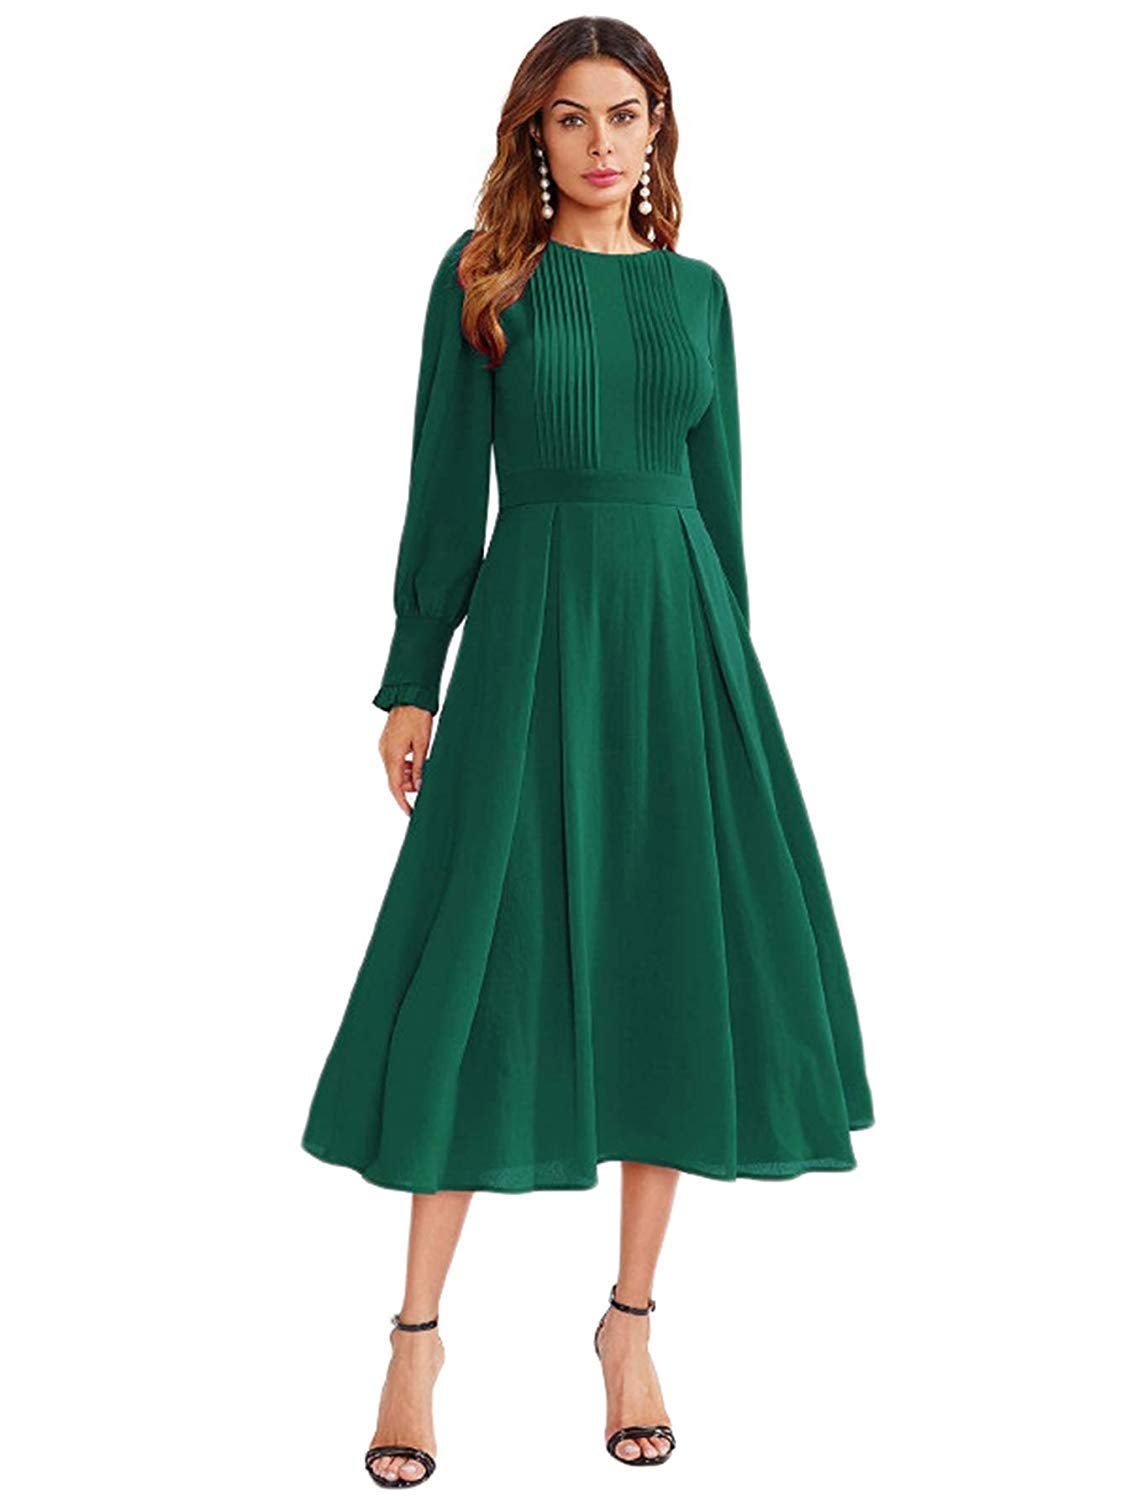 Milumia + Women’s Long Sleeve Pleated Fit & Flare Dress